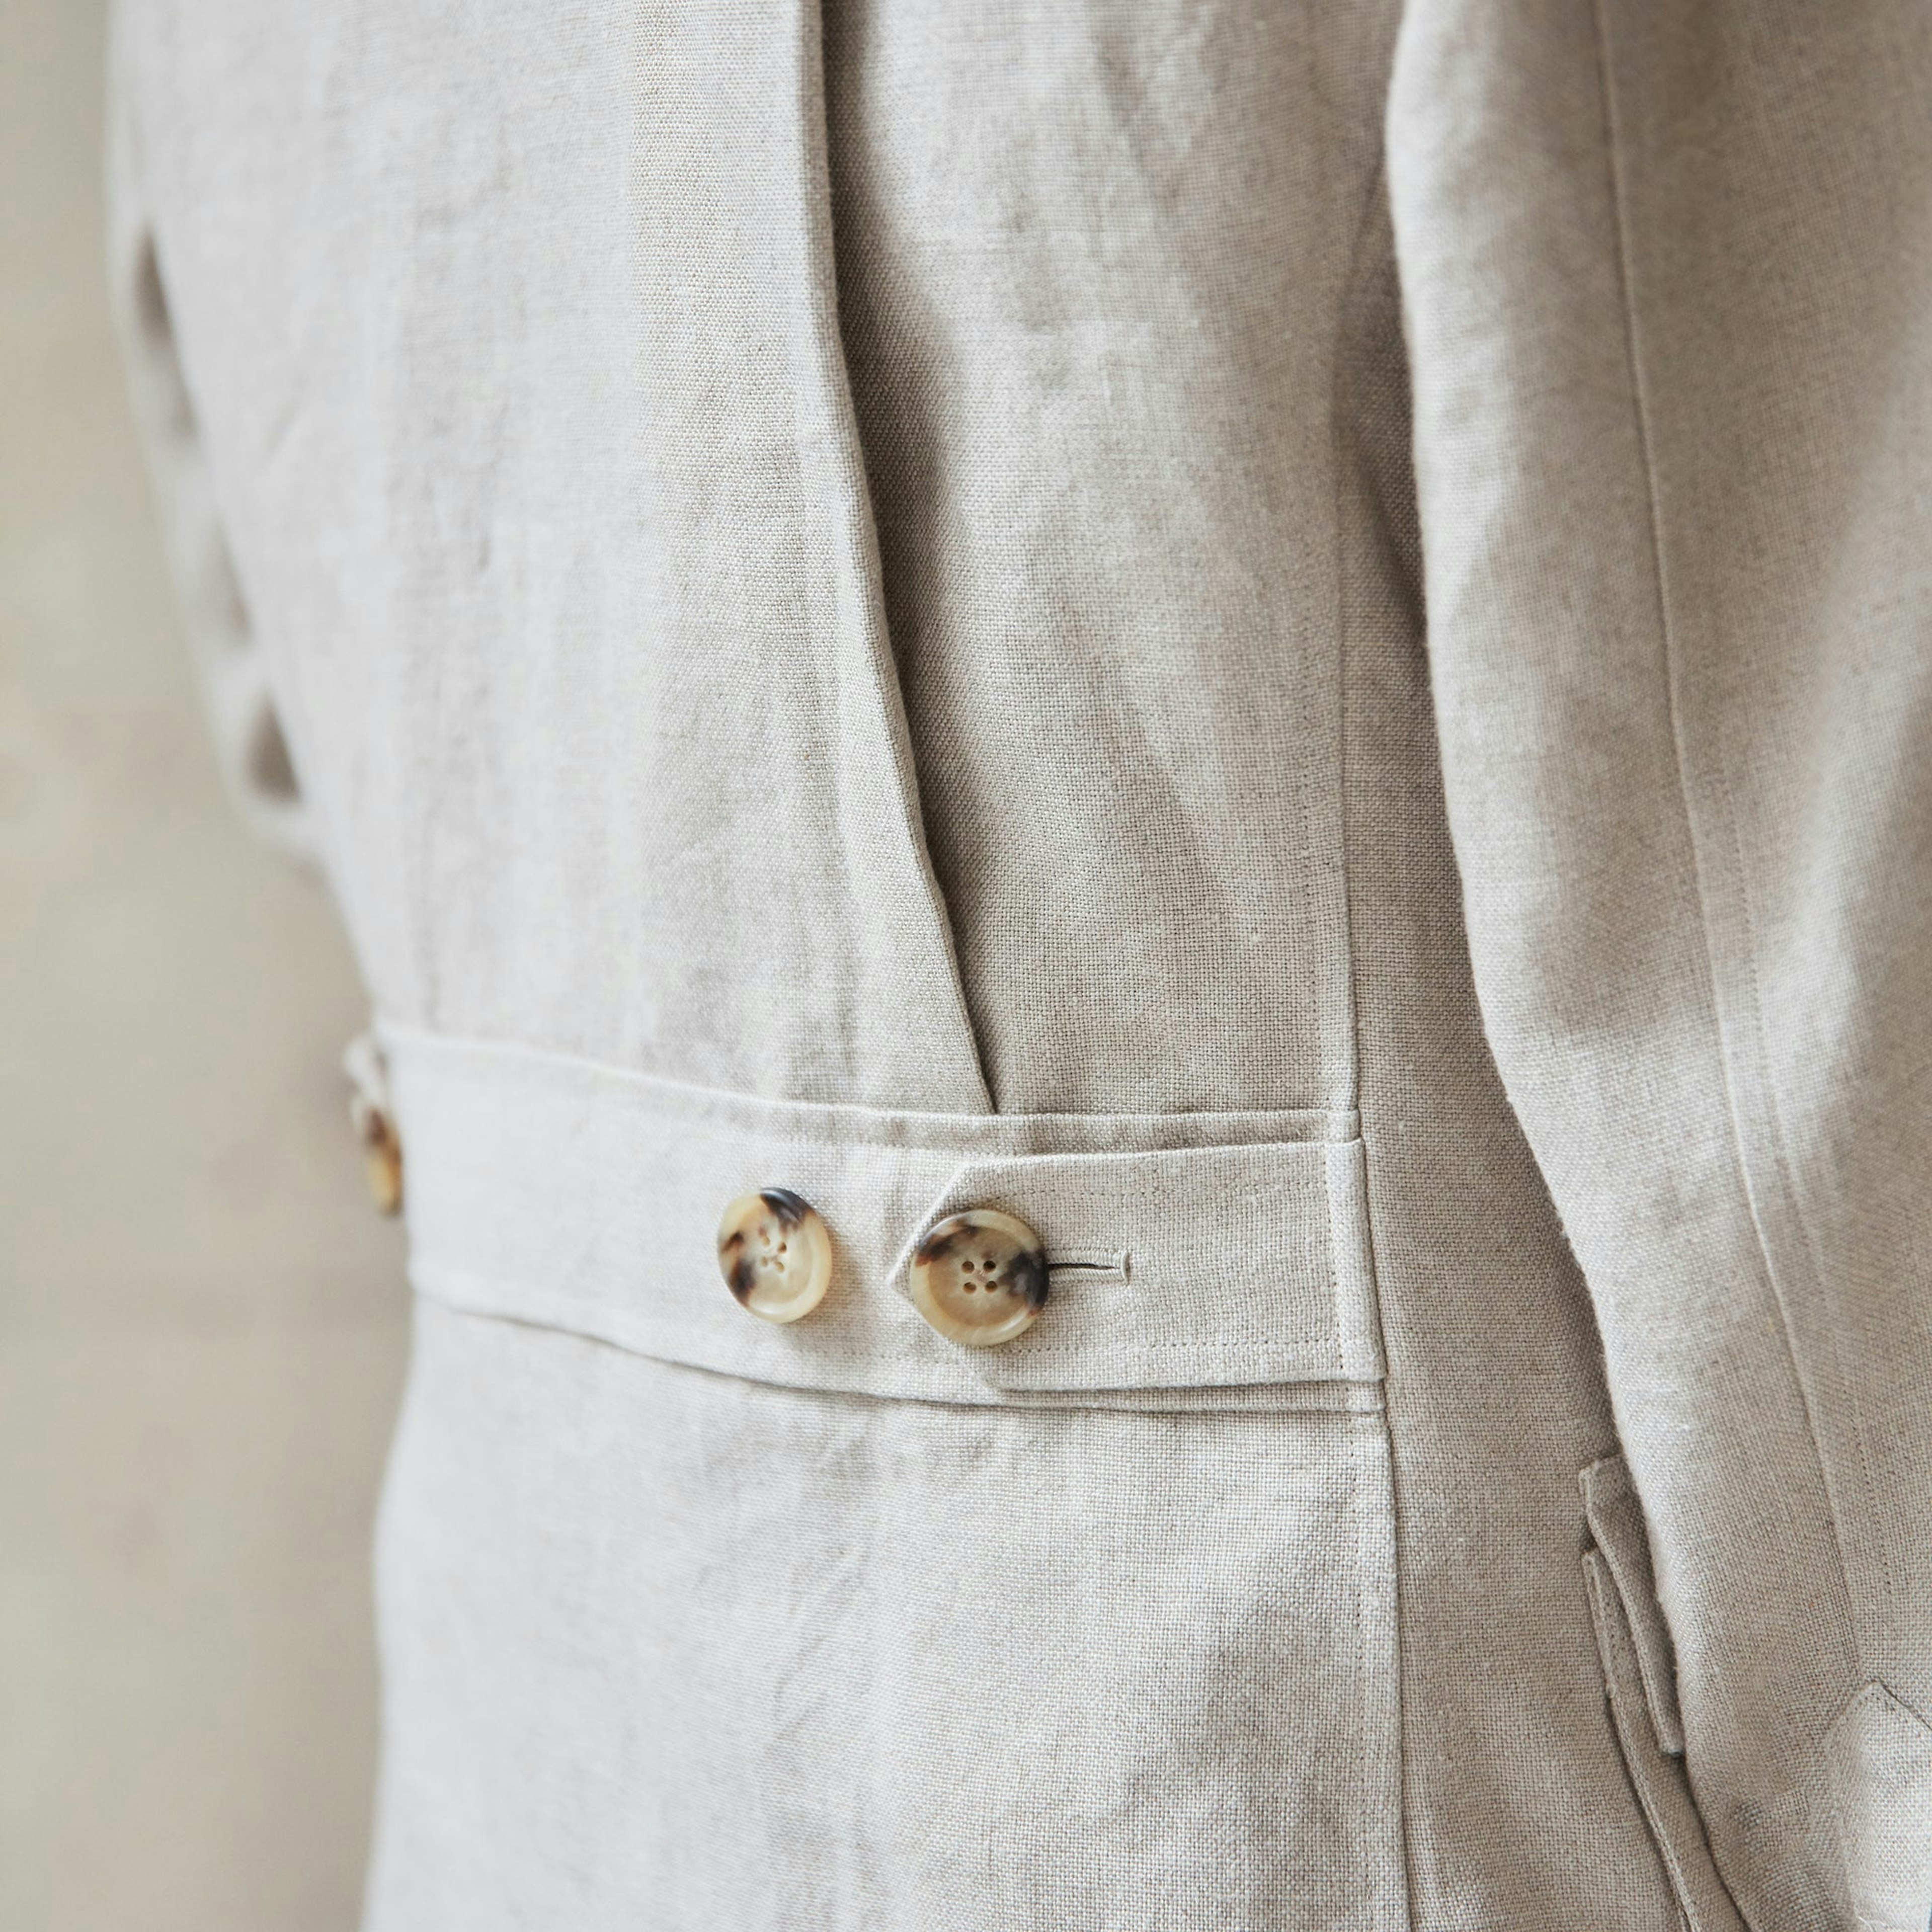 Our Safari jacket has been an Armoury essential for over a decade